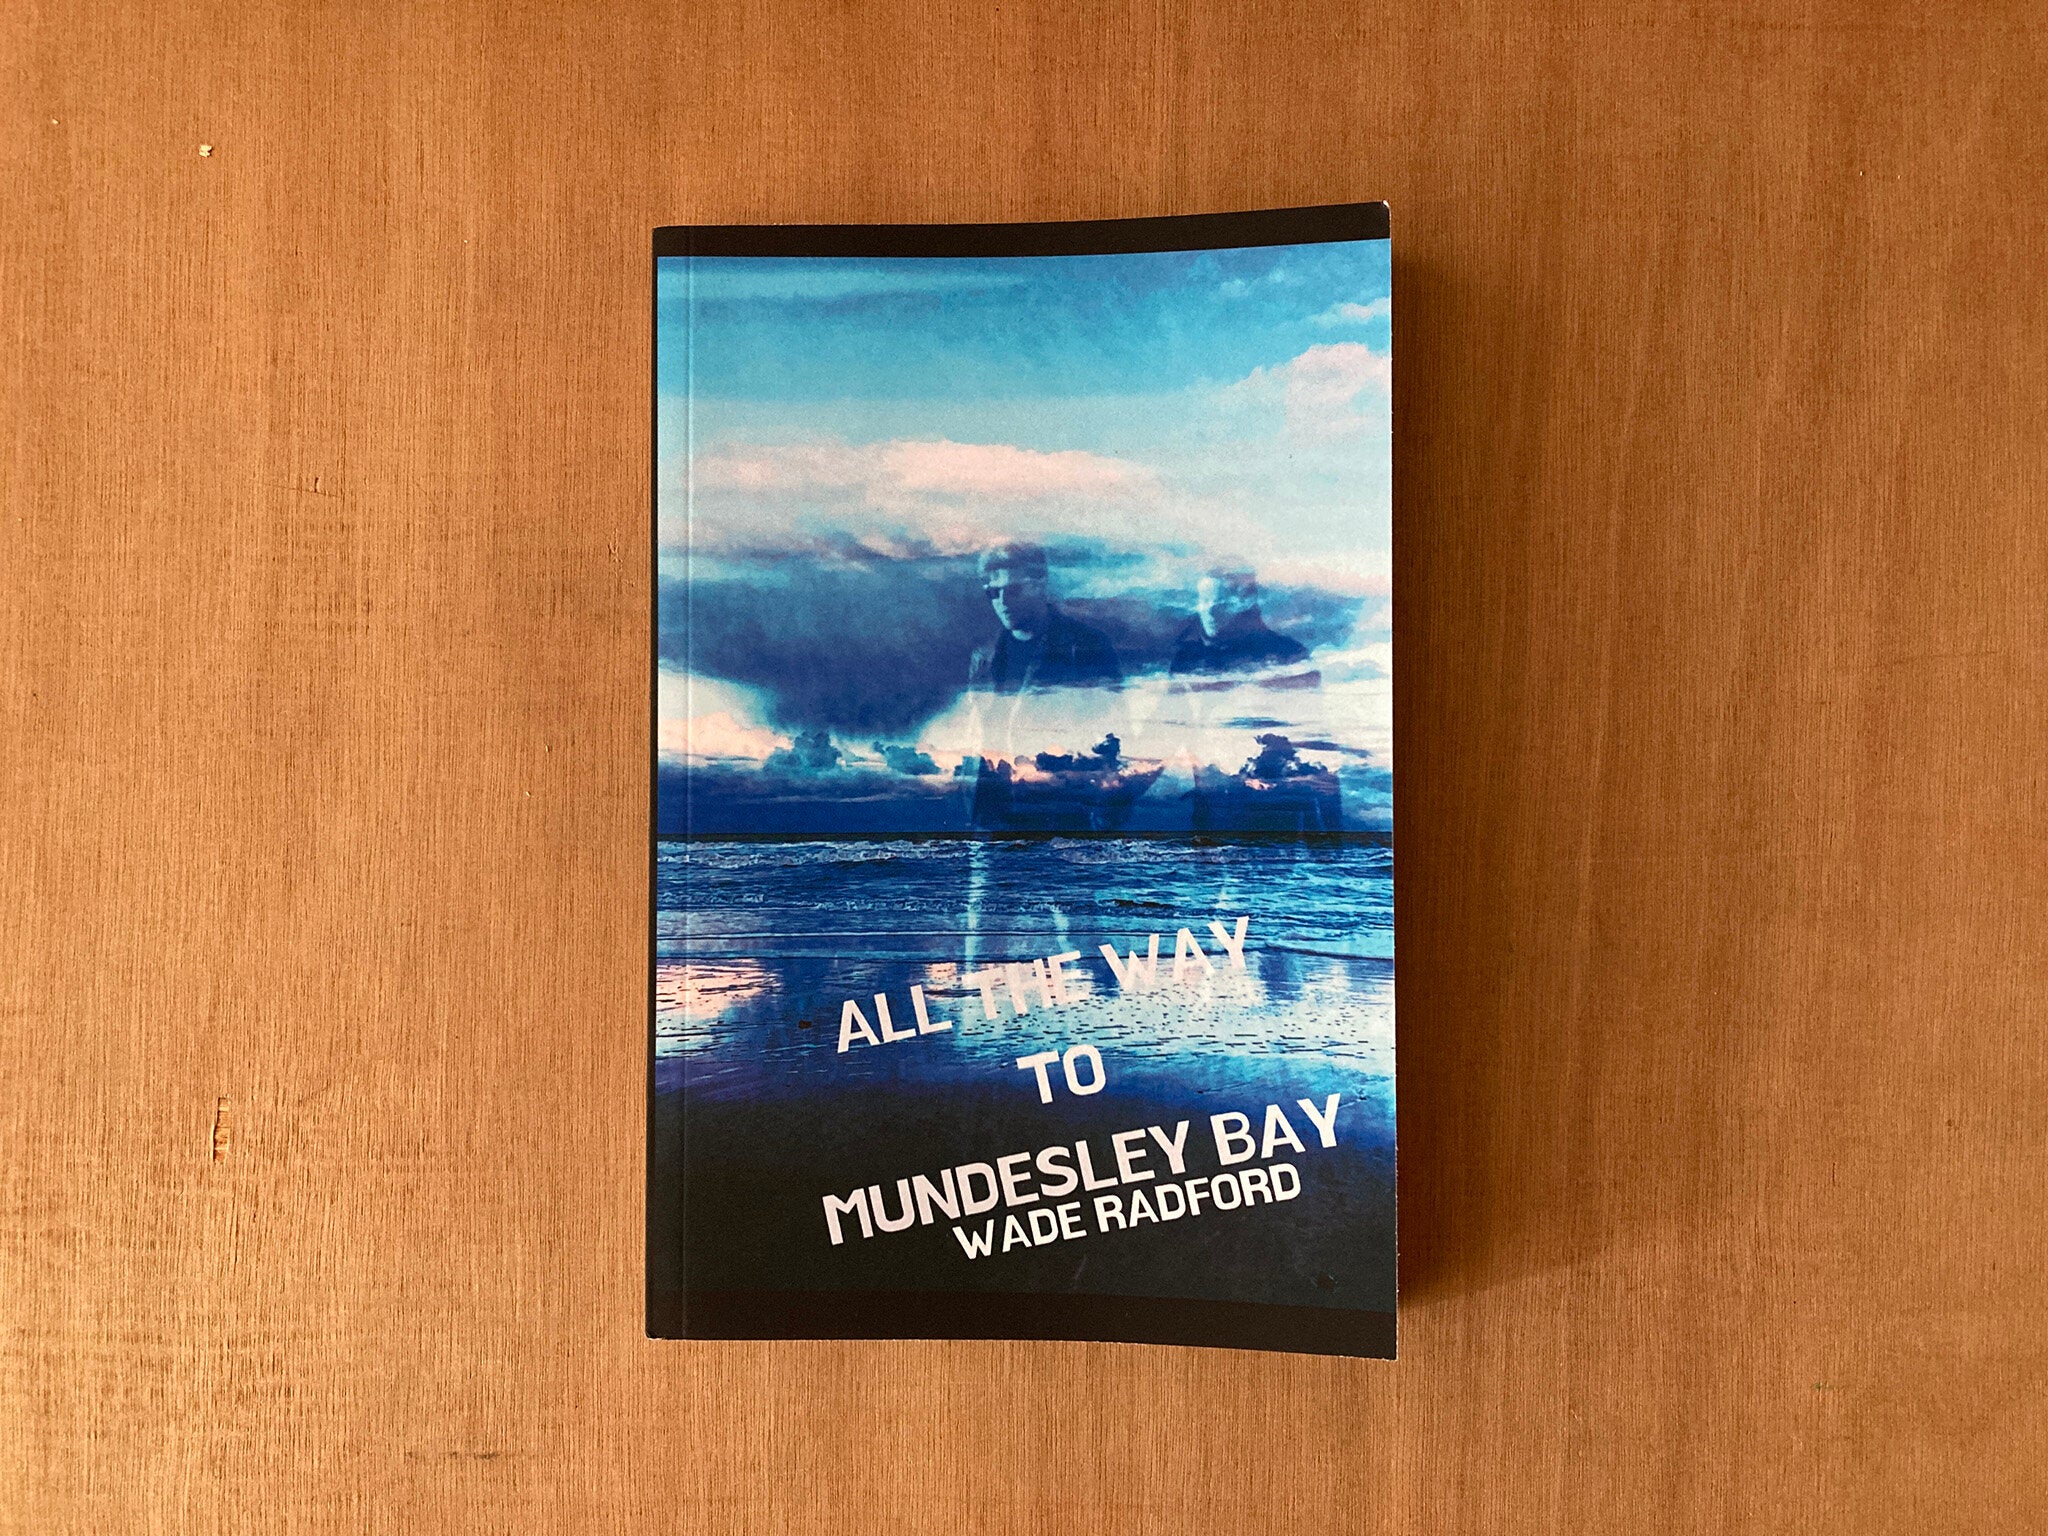 ALL THE WAY TO MUNDESLEY BAY by Wade Radford